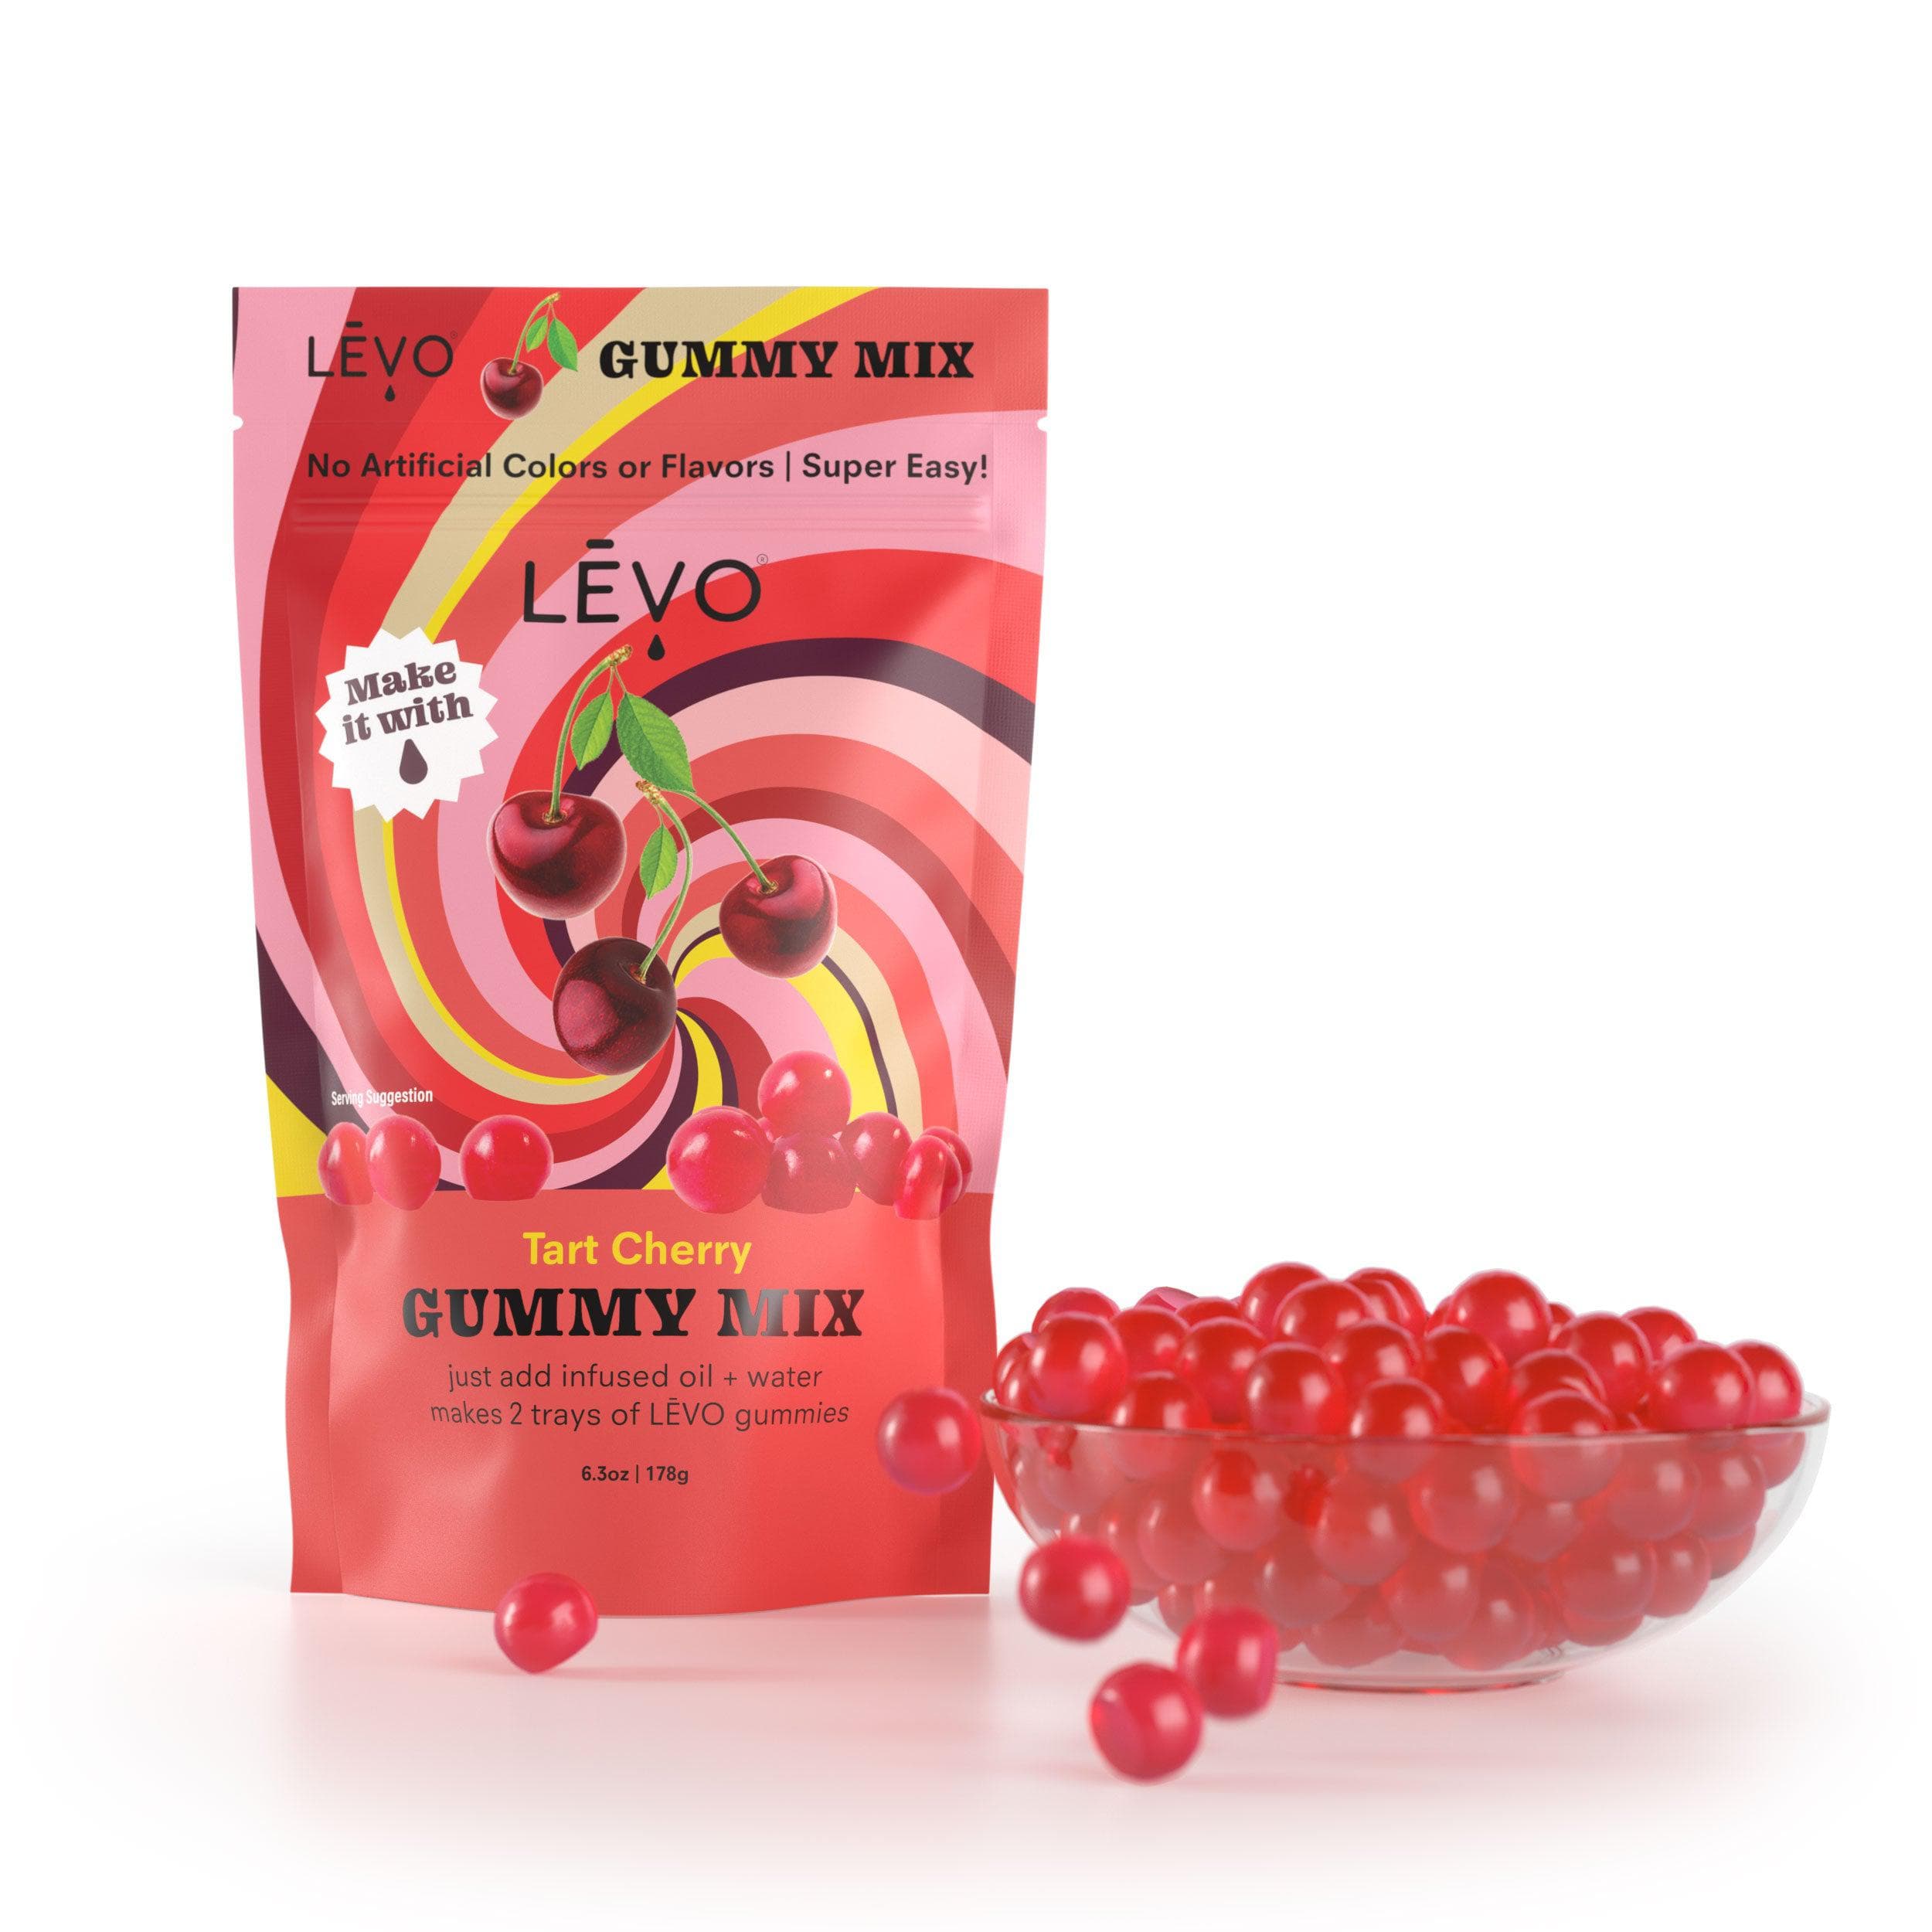 Simply add the herbal infused oil of your choice and 6 tablespoons of water to the LEVO Tart Cherry gummy mix  and then stir with heat. You now have your own potent gummies, perfect for sharing with friends!